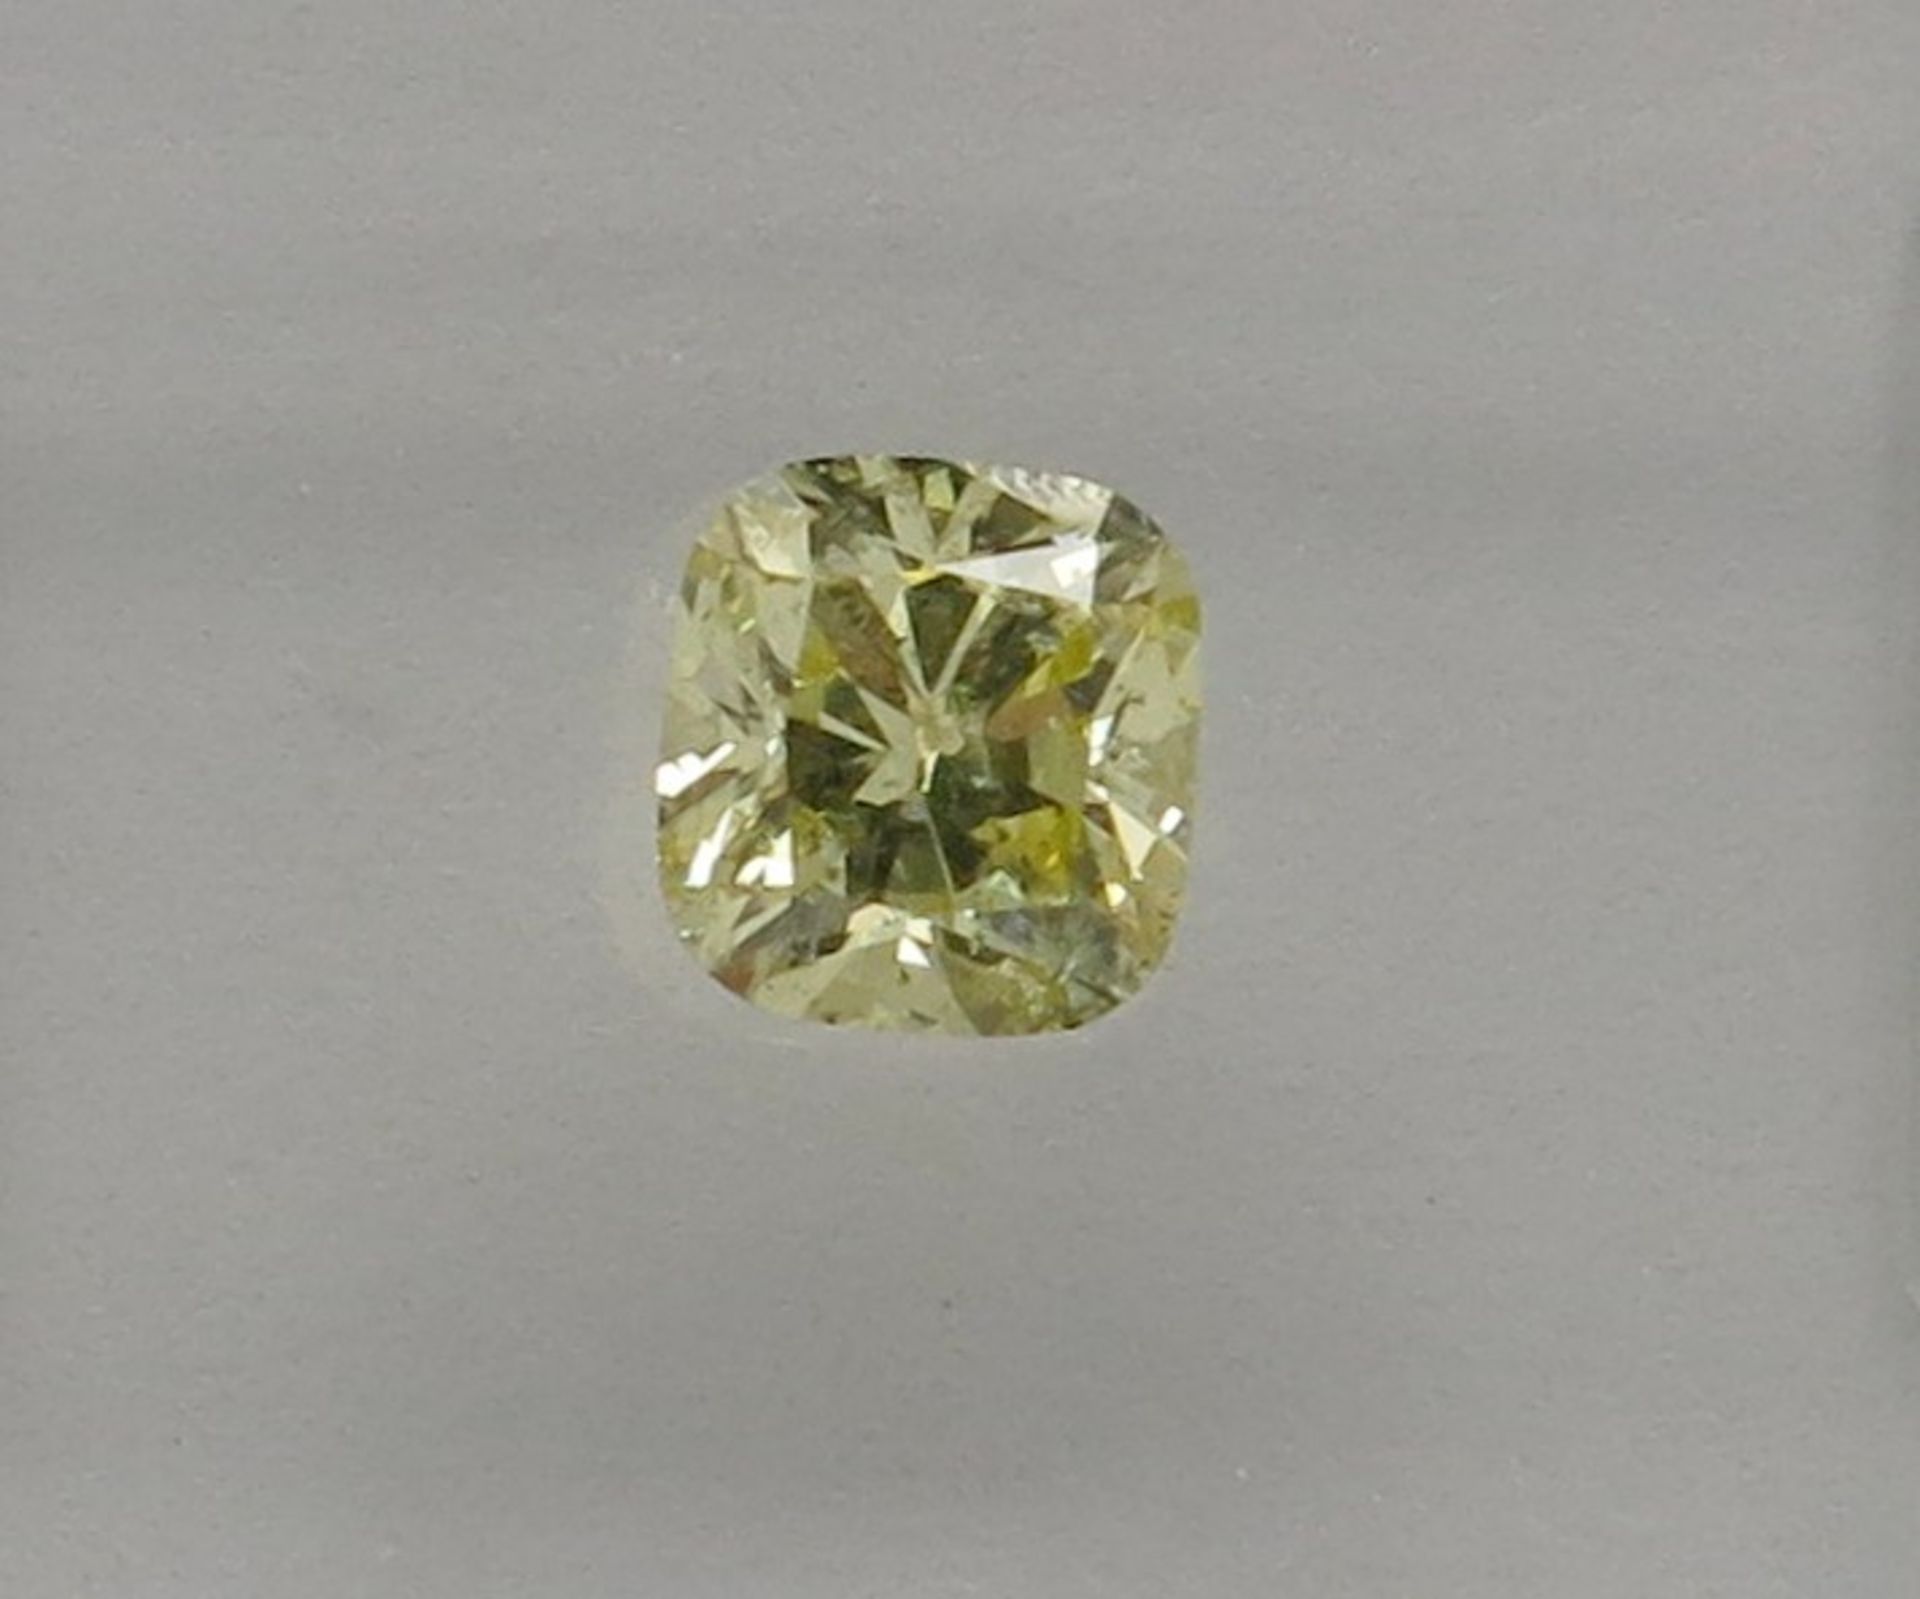 An unmounted Cushion-shaped diamond weighing app. 0.59ct. Colour : Yellow .Clarity :I1